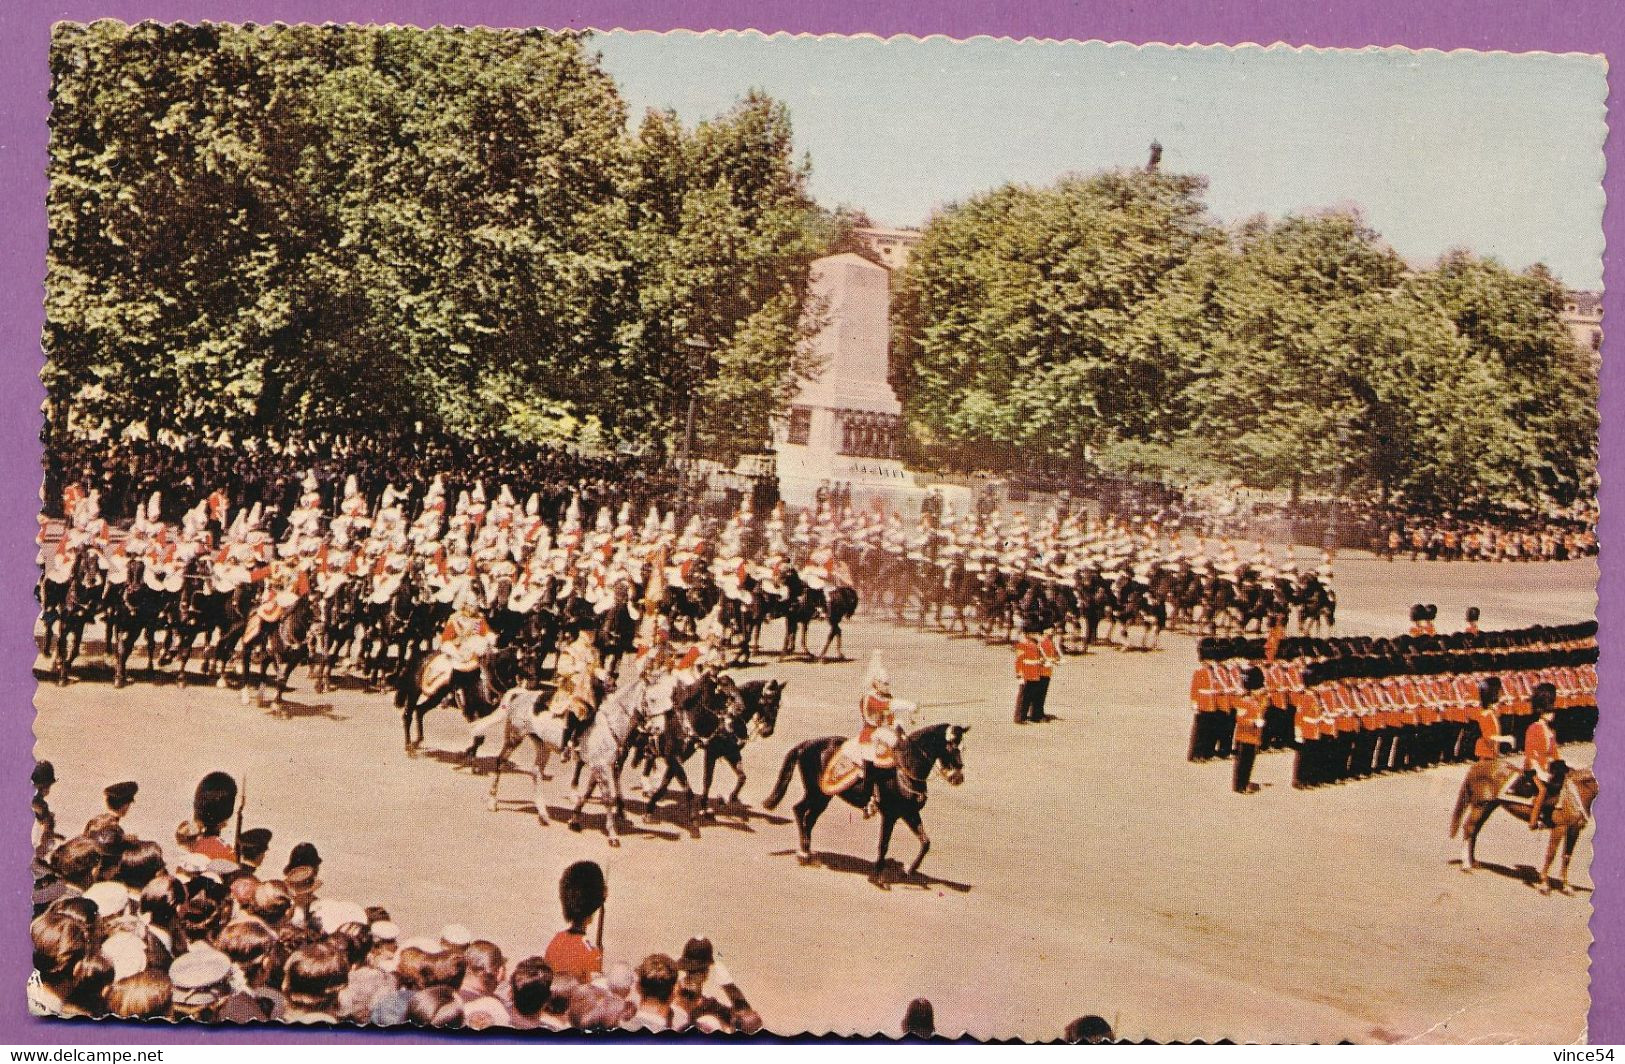 Trooping The Colour - Horseguards Parade - London - Whitehall